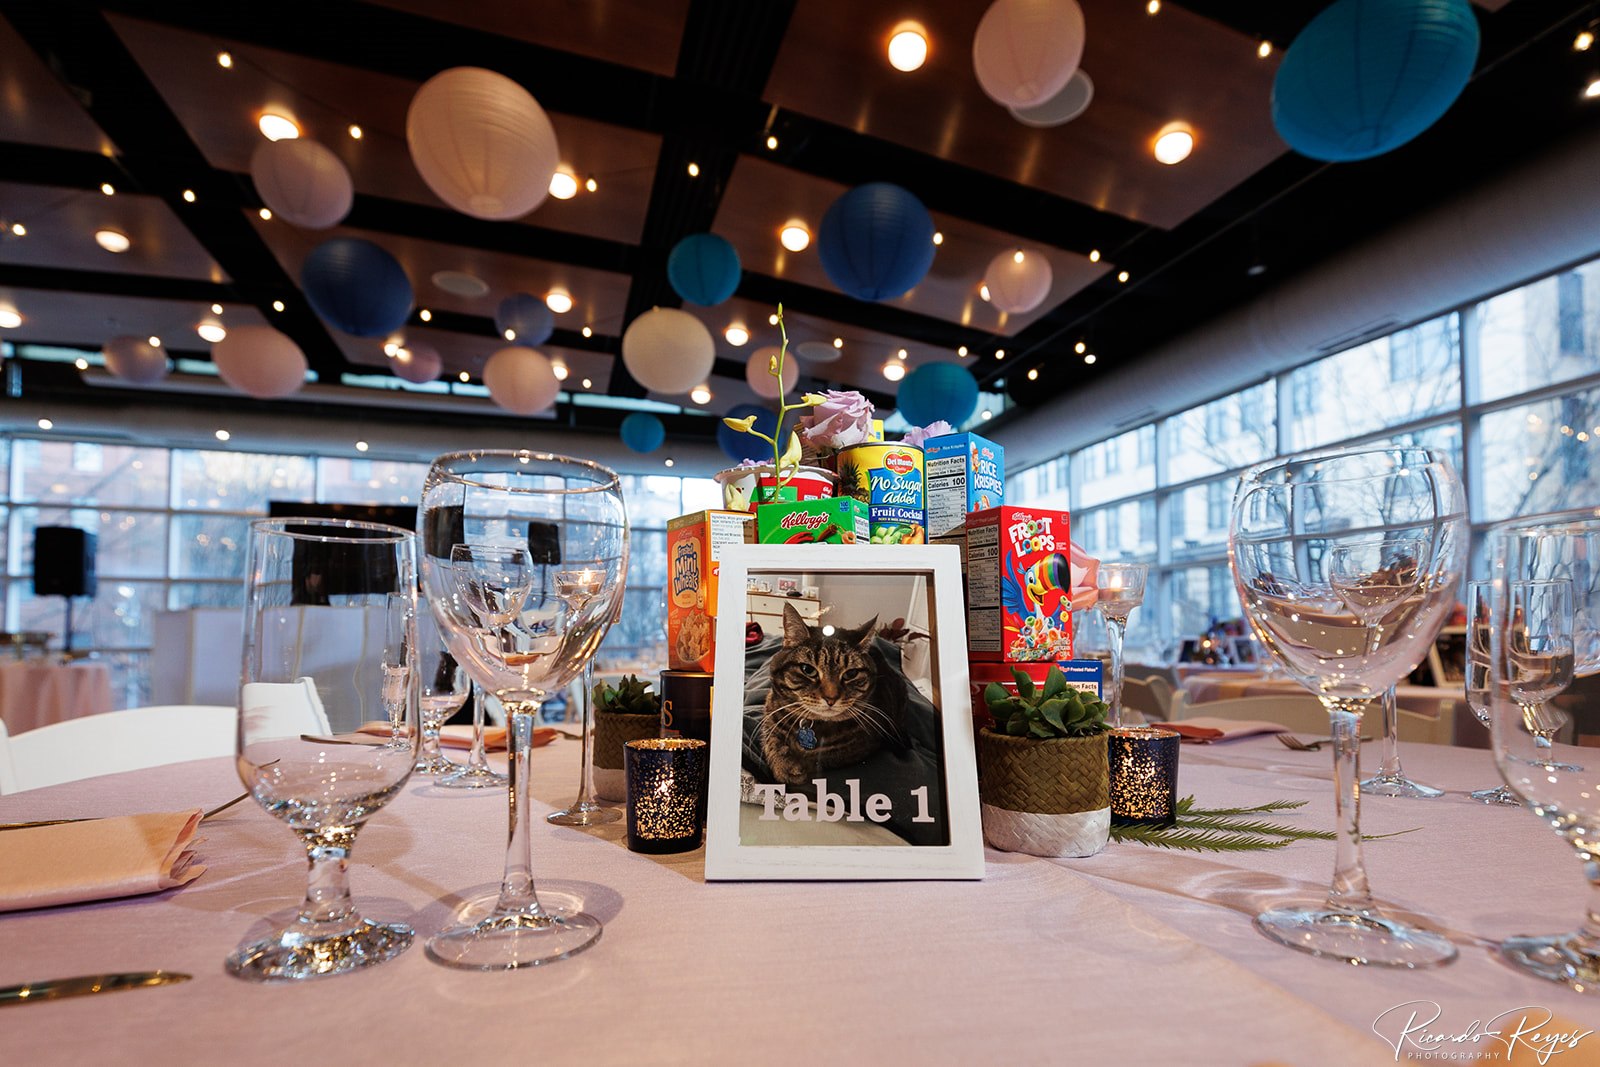 Community service donated centerpieces and custom table number for Lana to a Tea All About Lana Bat Mitzvah Party at VisArts in Rockville, MD | Pop Color Events | Adding a Pop of Color to Bar & Bat Mitzvahs in DC, MD & VA | Photo by: Ricardo Reyes Photography